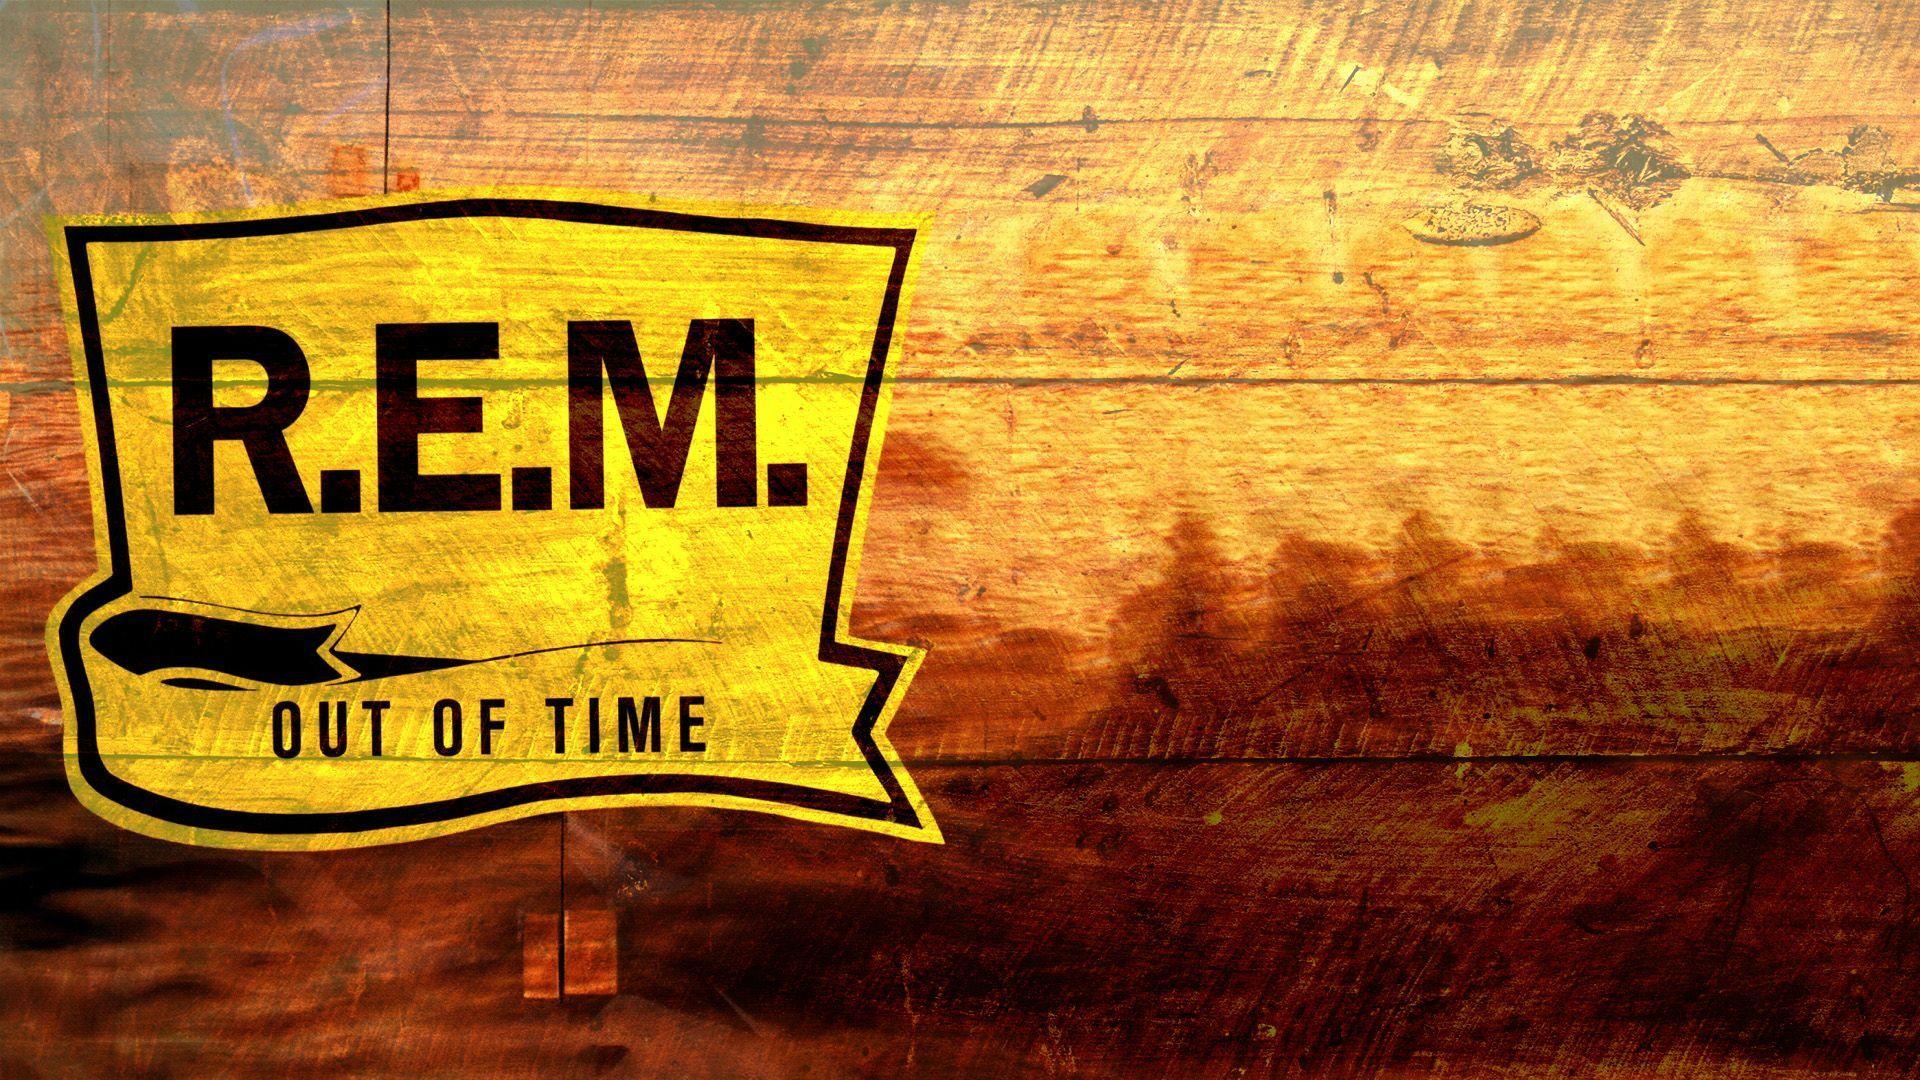 R.E.M. of Time [1920x1080]